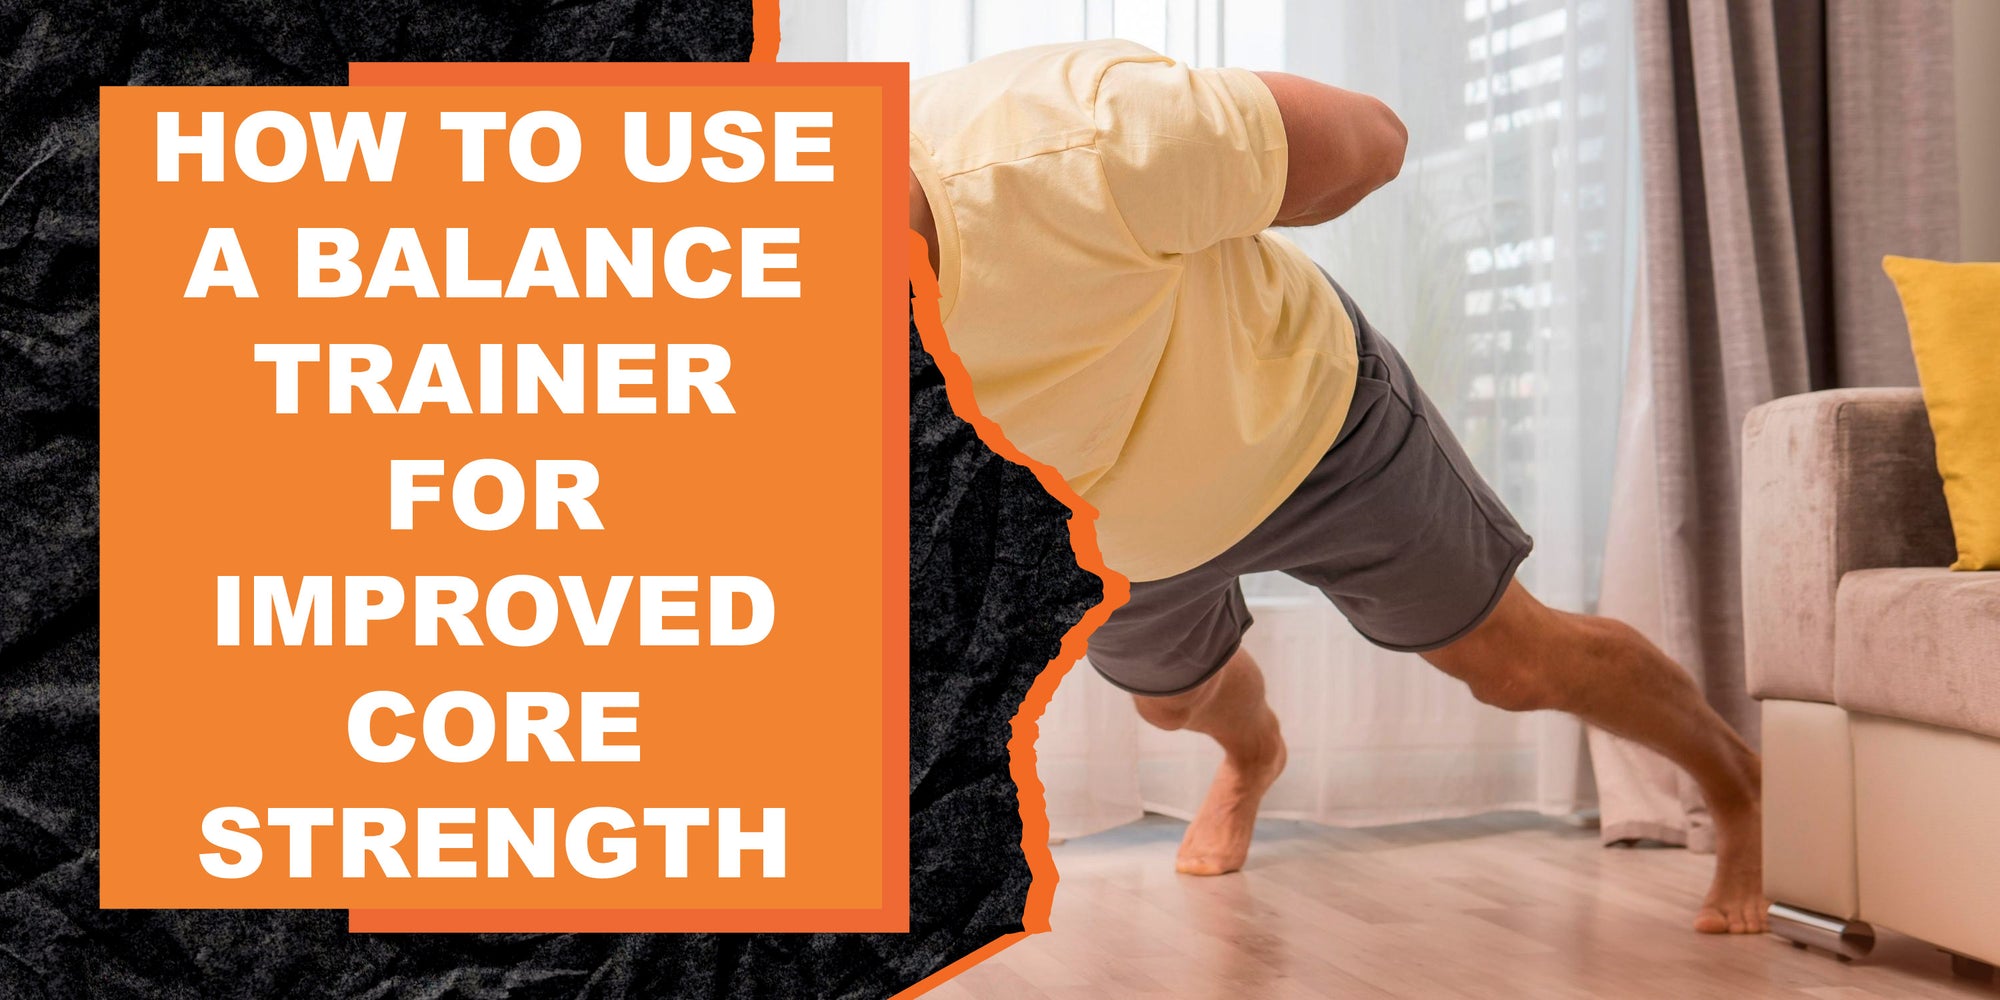 How to Use a Balance Trainer for Improved Core Strength